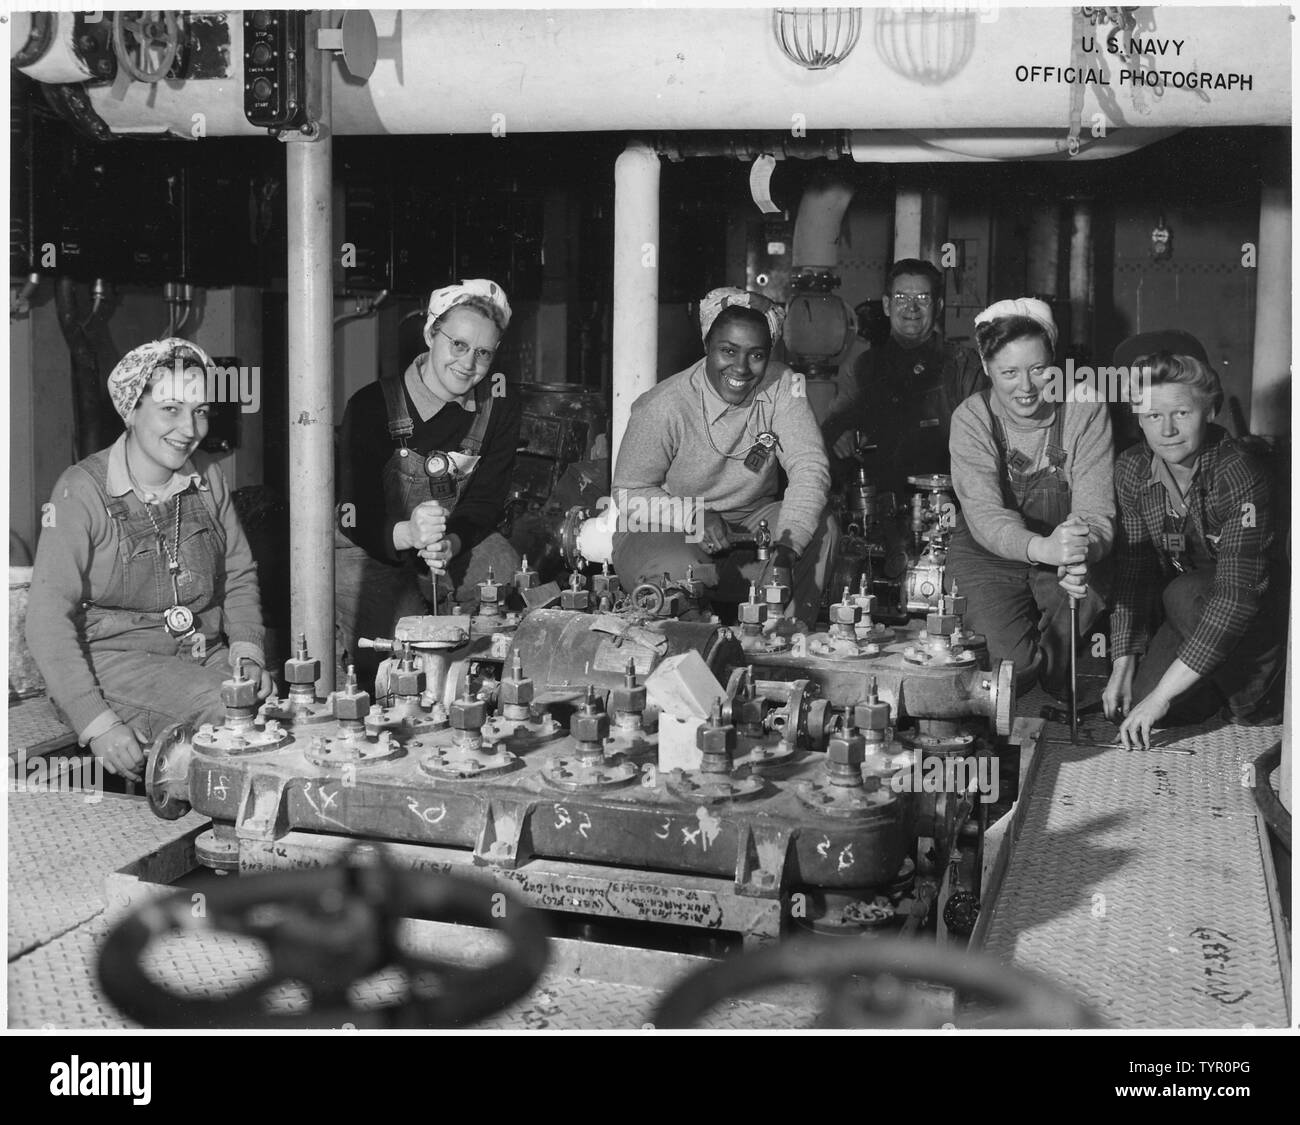 Women shipfitters worked on board the USS NEREUS, and are shown as they neared completion of the floor in a part of the engine room. Left to right are Shipfitters Betty Pierce, Lola Thomas, Margaret Houston Thelma Mort and Katie Stanfill. US Navy Yard, Mare Island,CA. Stock Photo